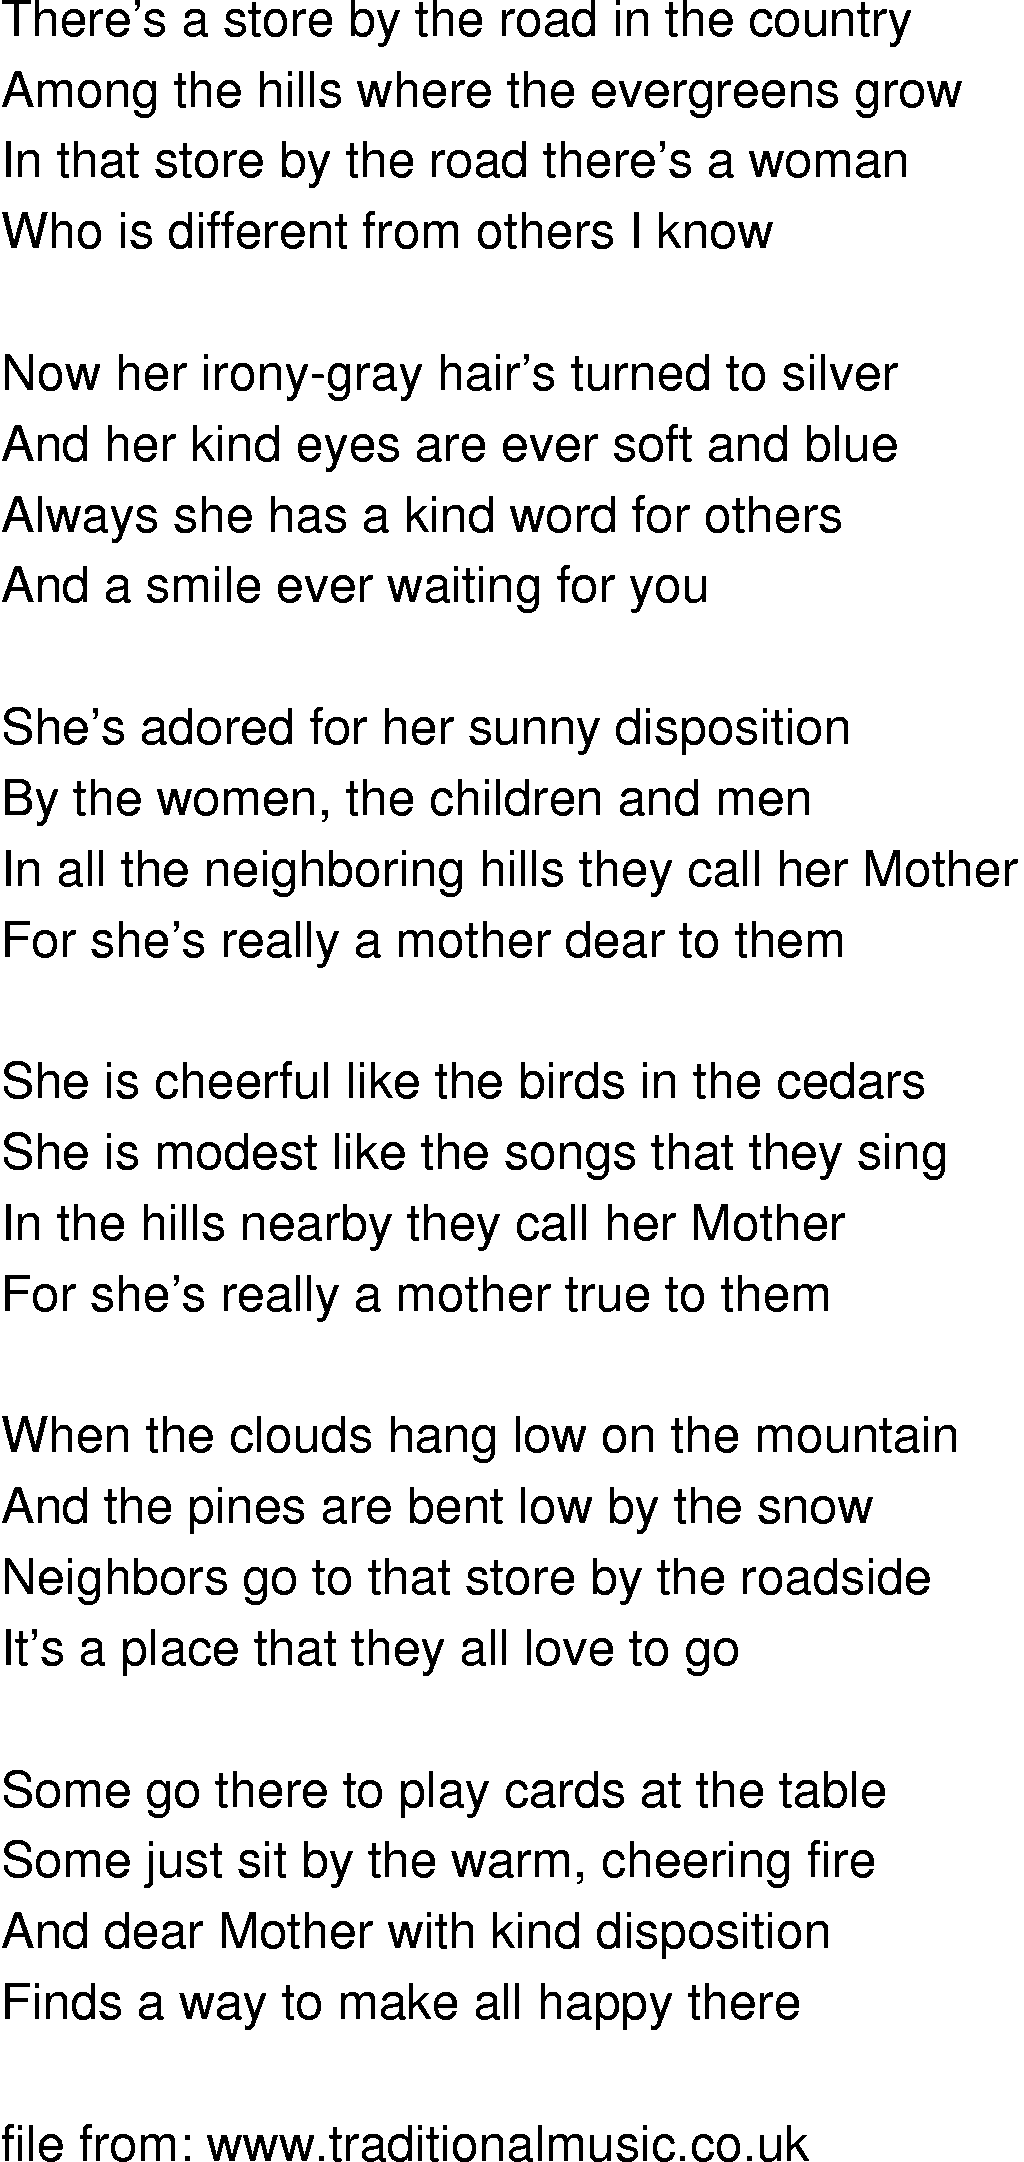 Old-Time (oldtimey) Song Lyrics - they call her mother